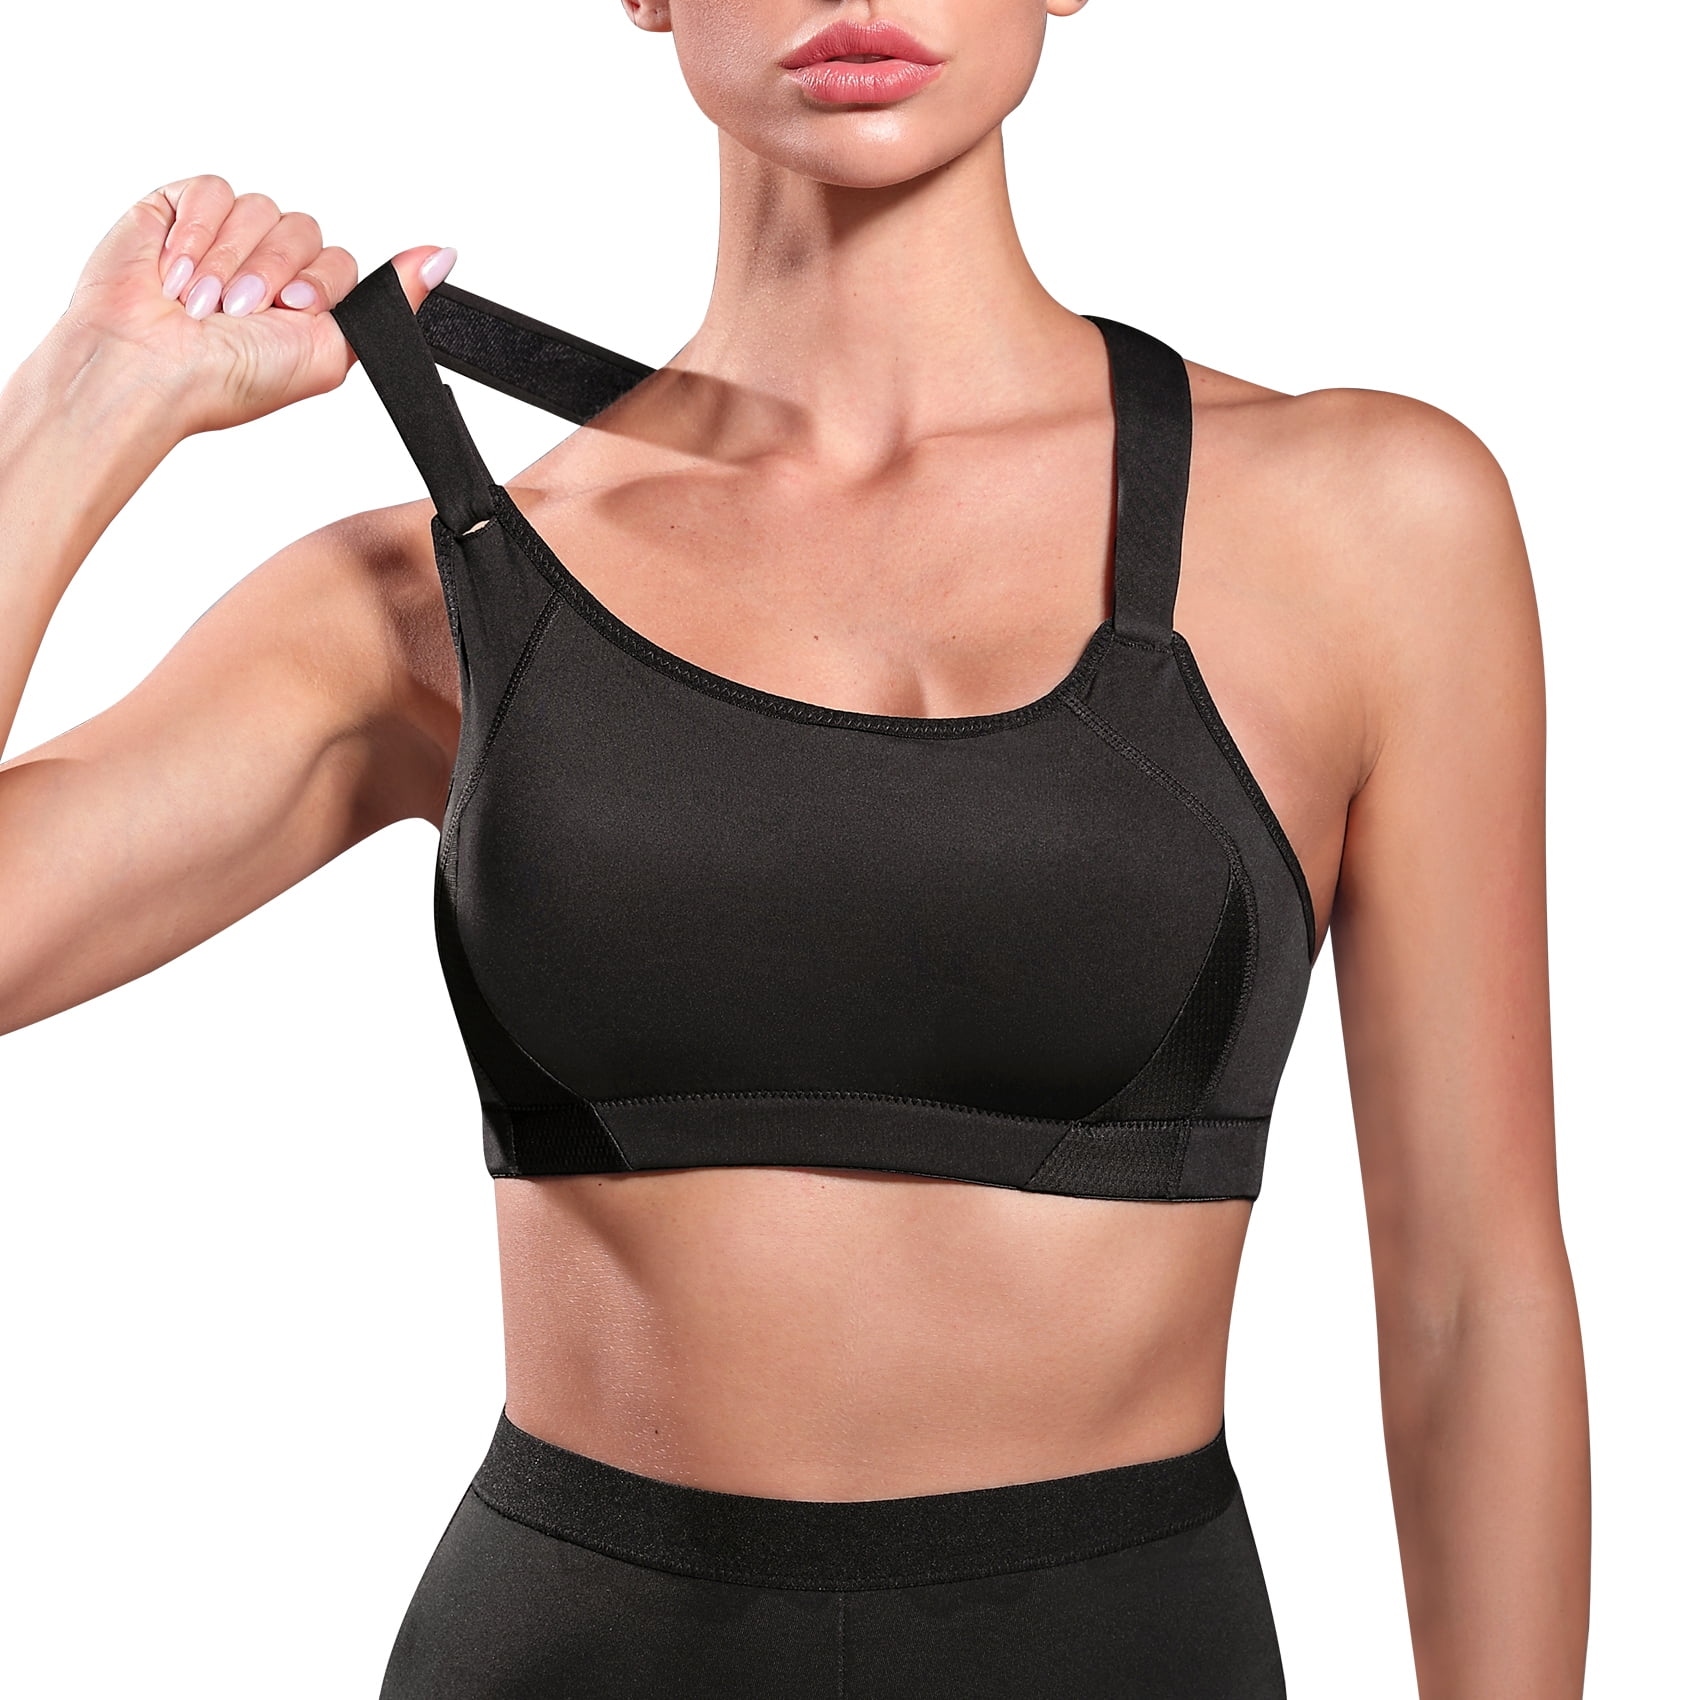 Your Fitness: Could You Use This High-Tech, Bounce-Free Sports Bra?